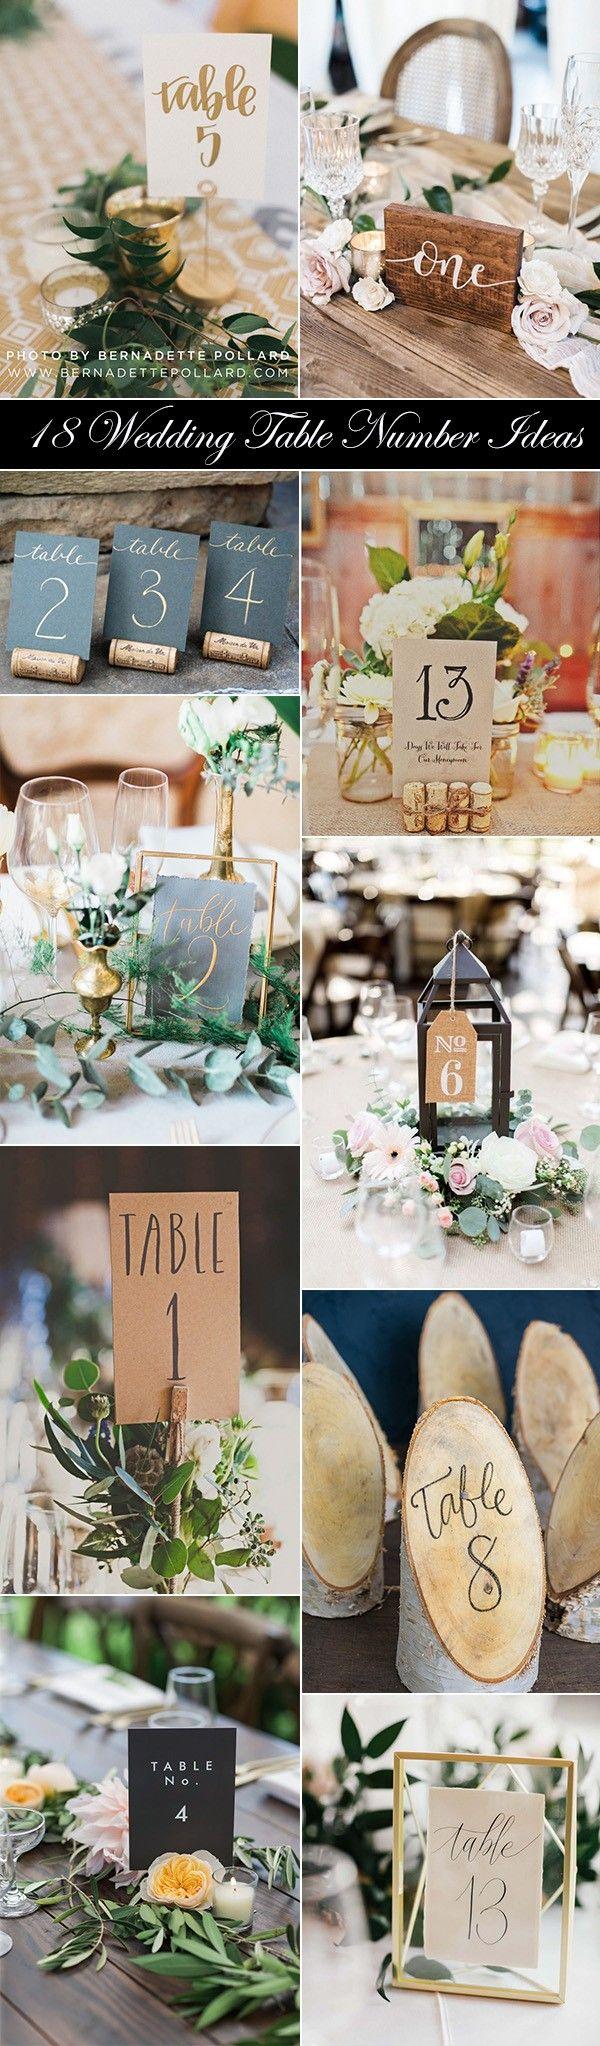 Mariage - 18 Inspiring Wedding Table Number Ideas To Love